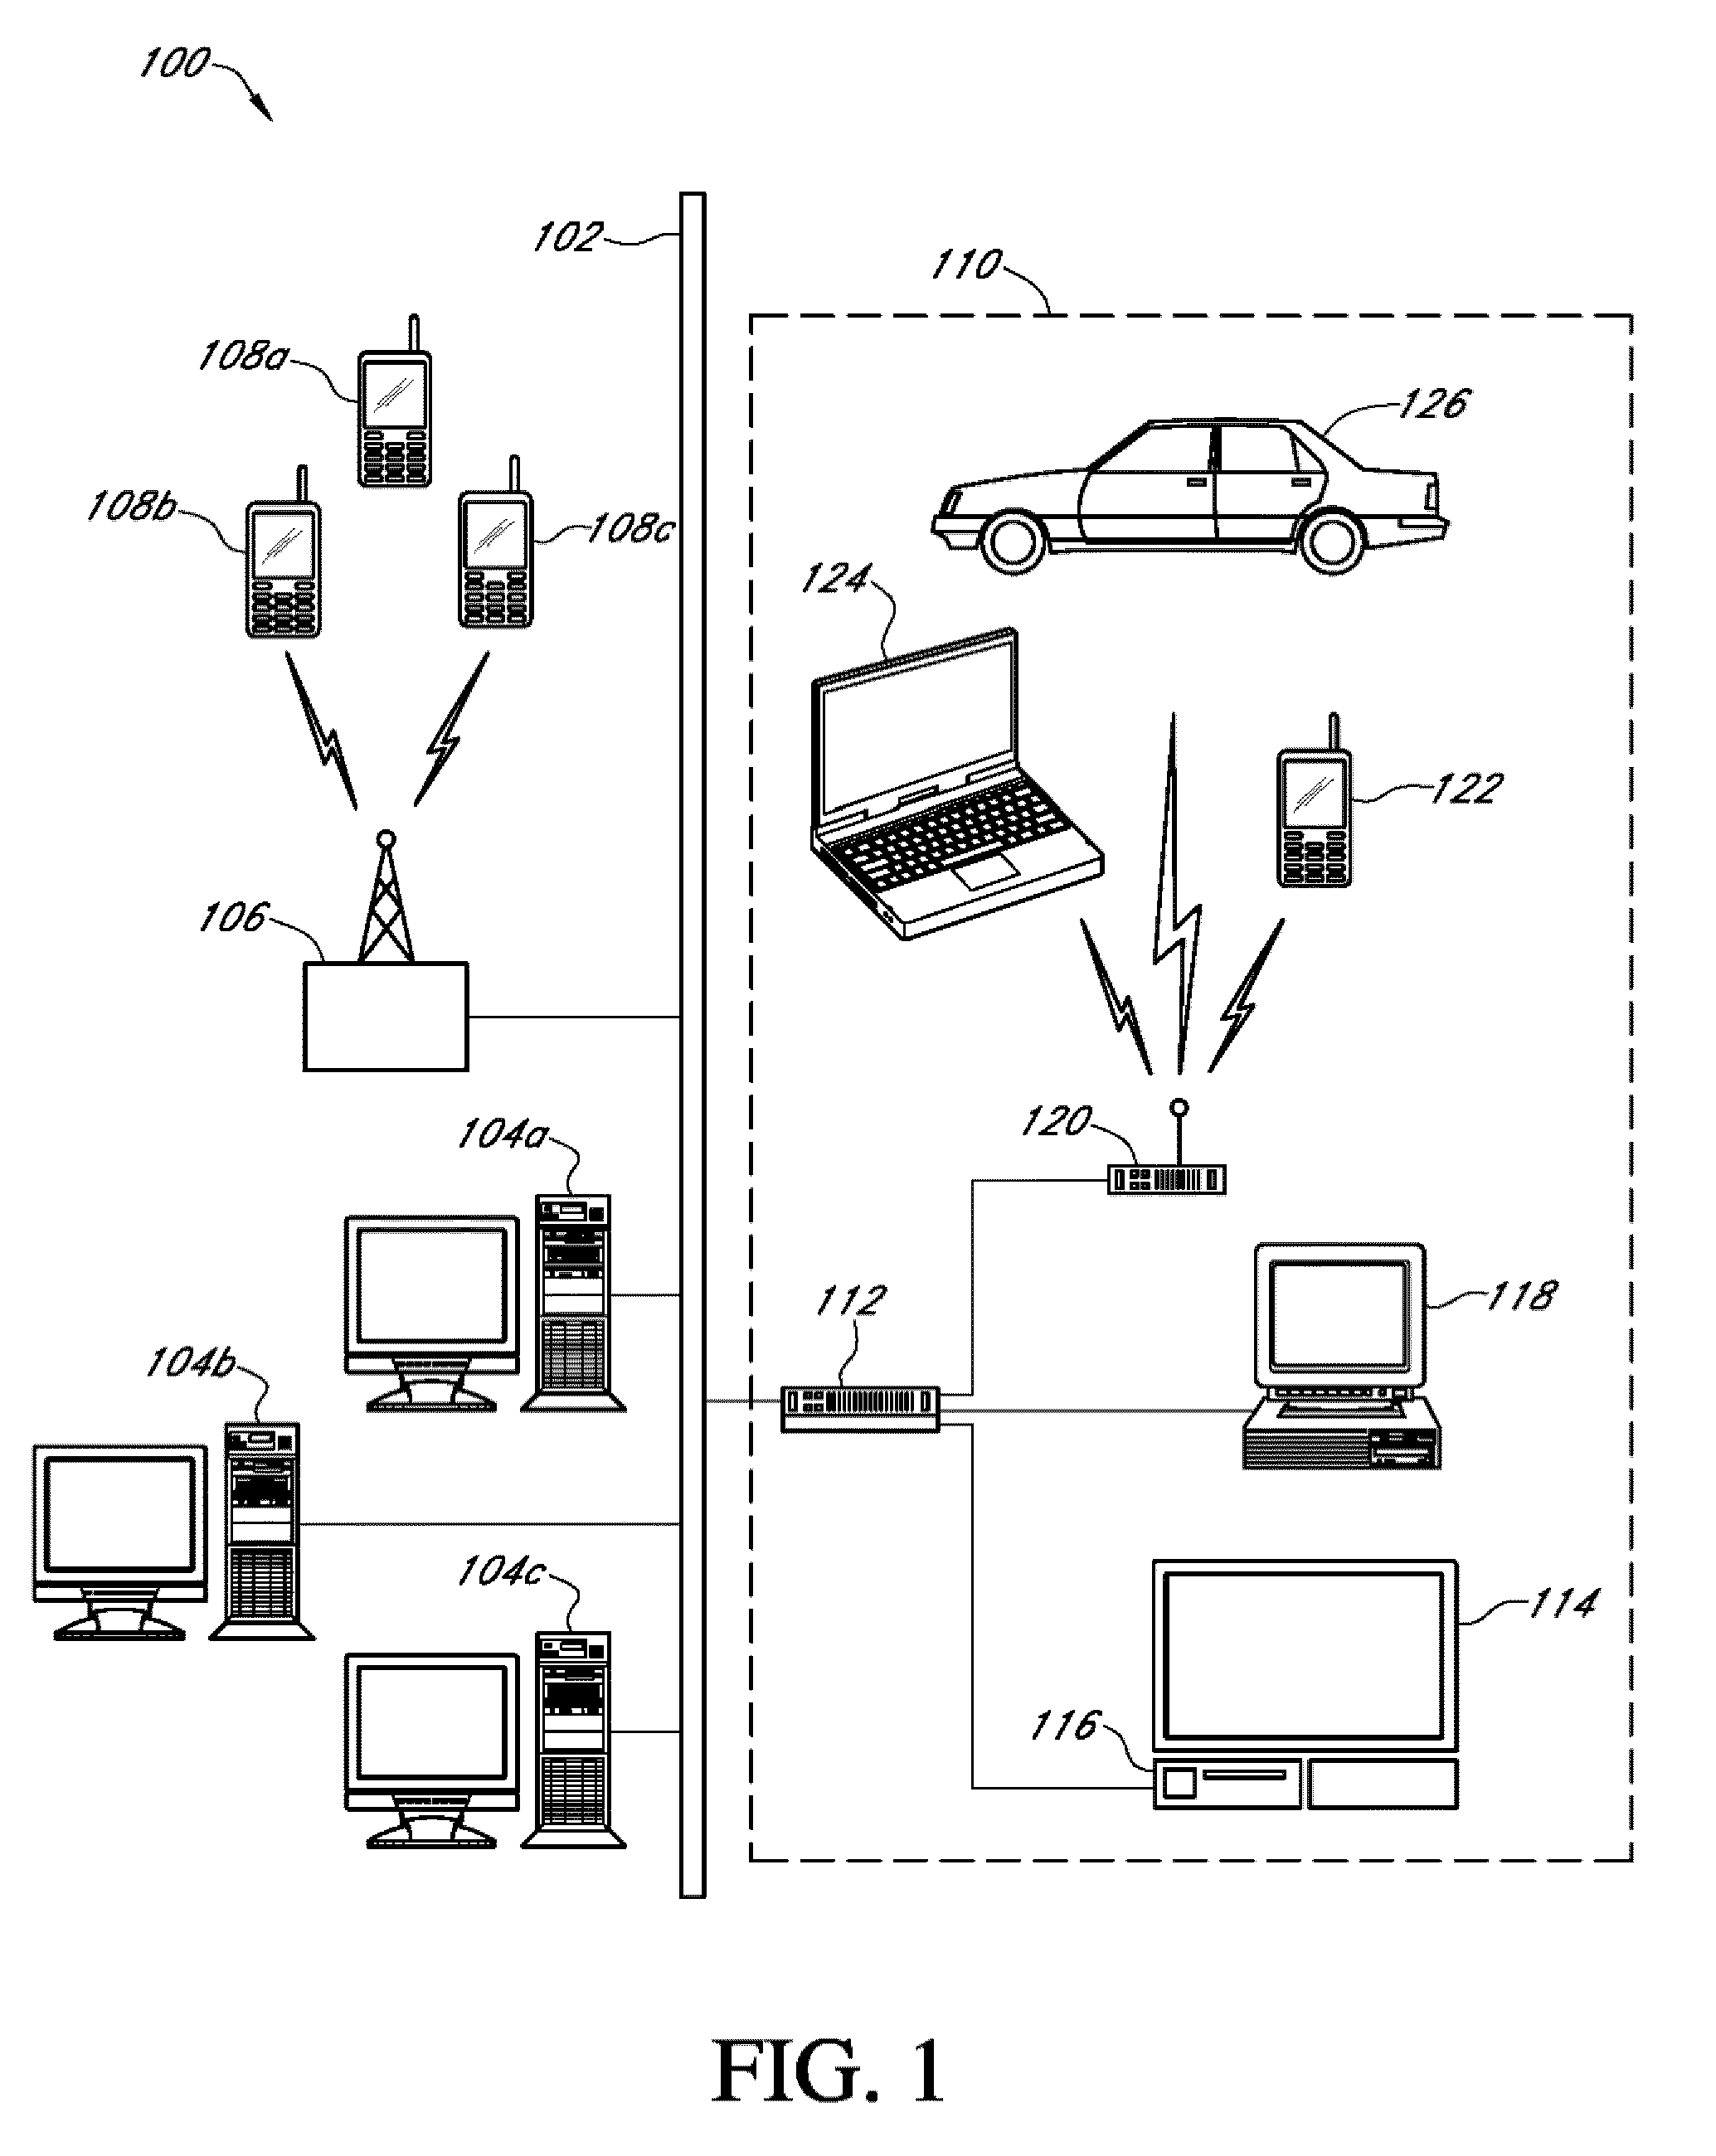 Systems and methods for video bookmarking